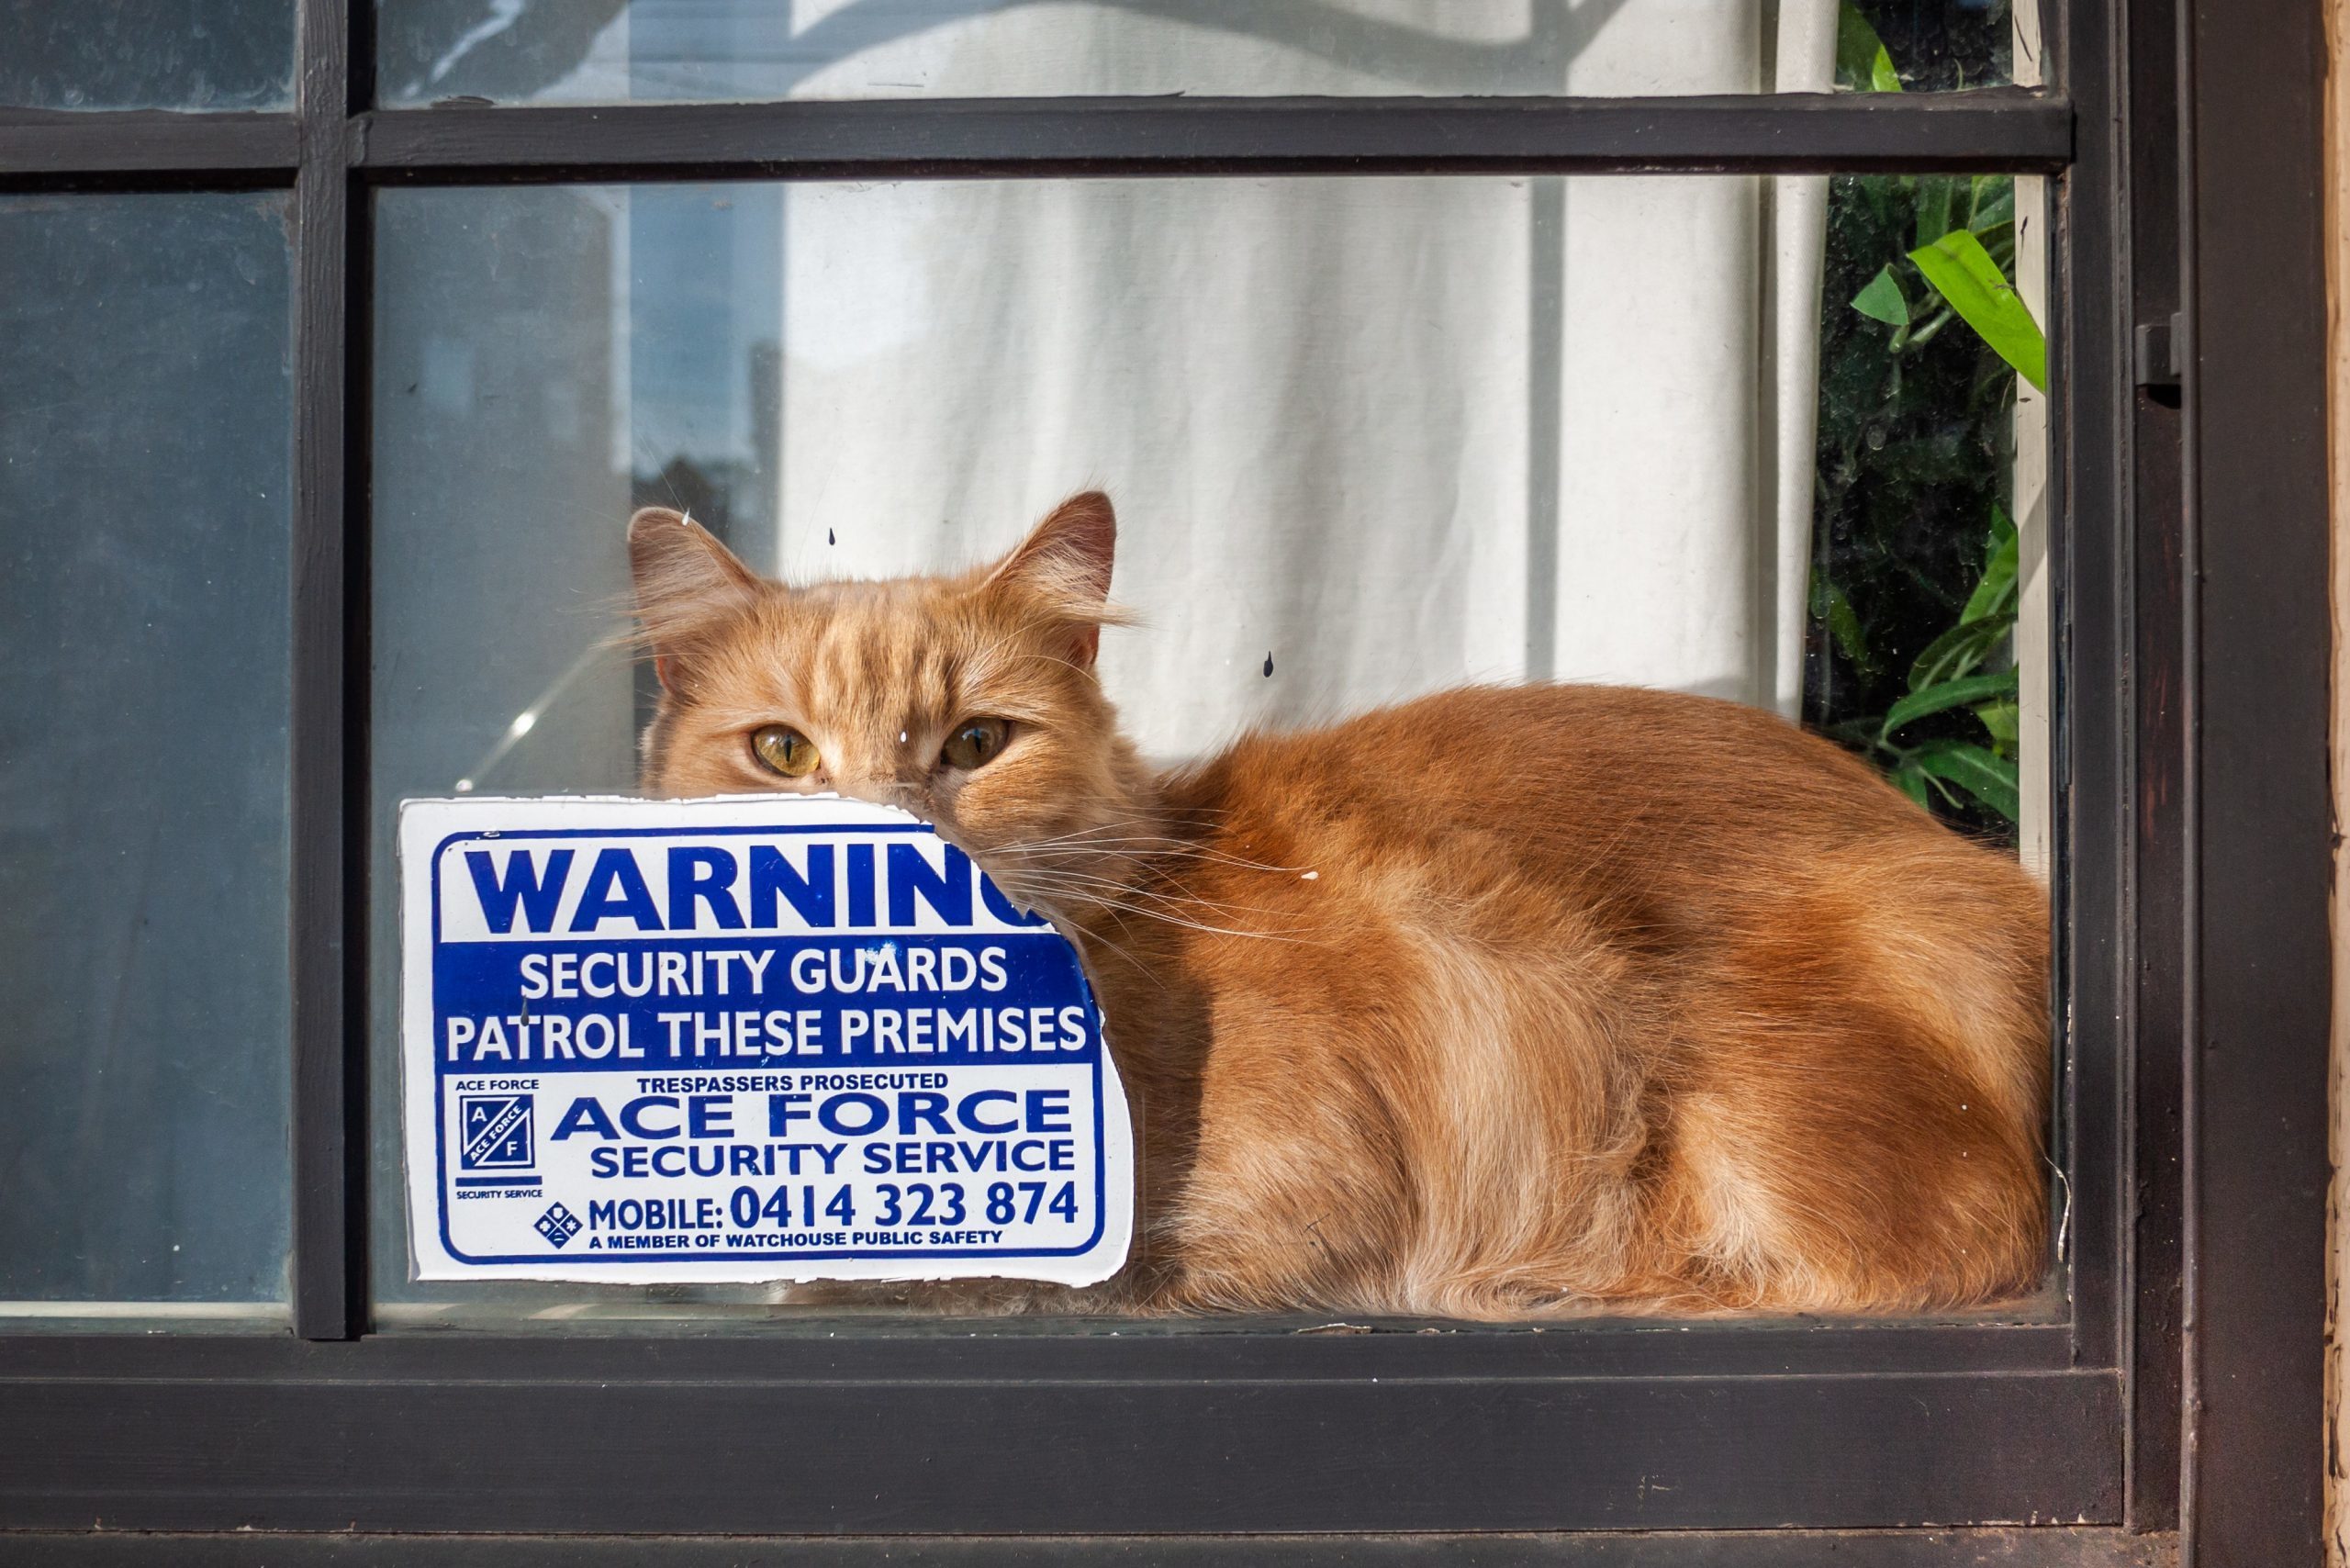 home security sticker, 13 Ways Your Yard Is Giving Burglars Clues, follow News Without Politics, NWP, most non political news source, home safety, backyards